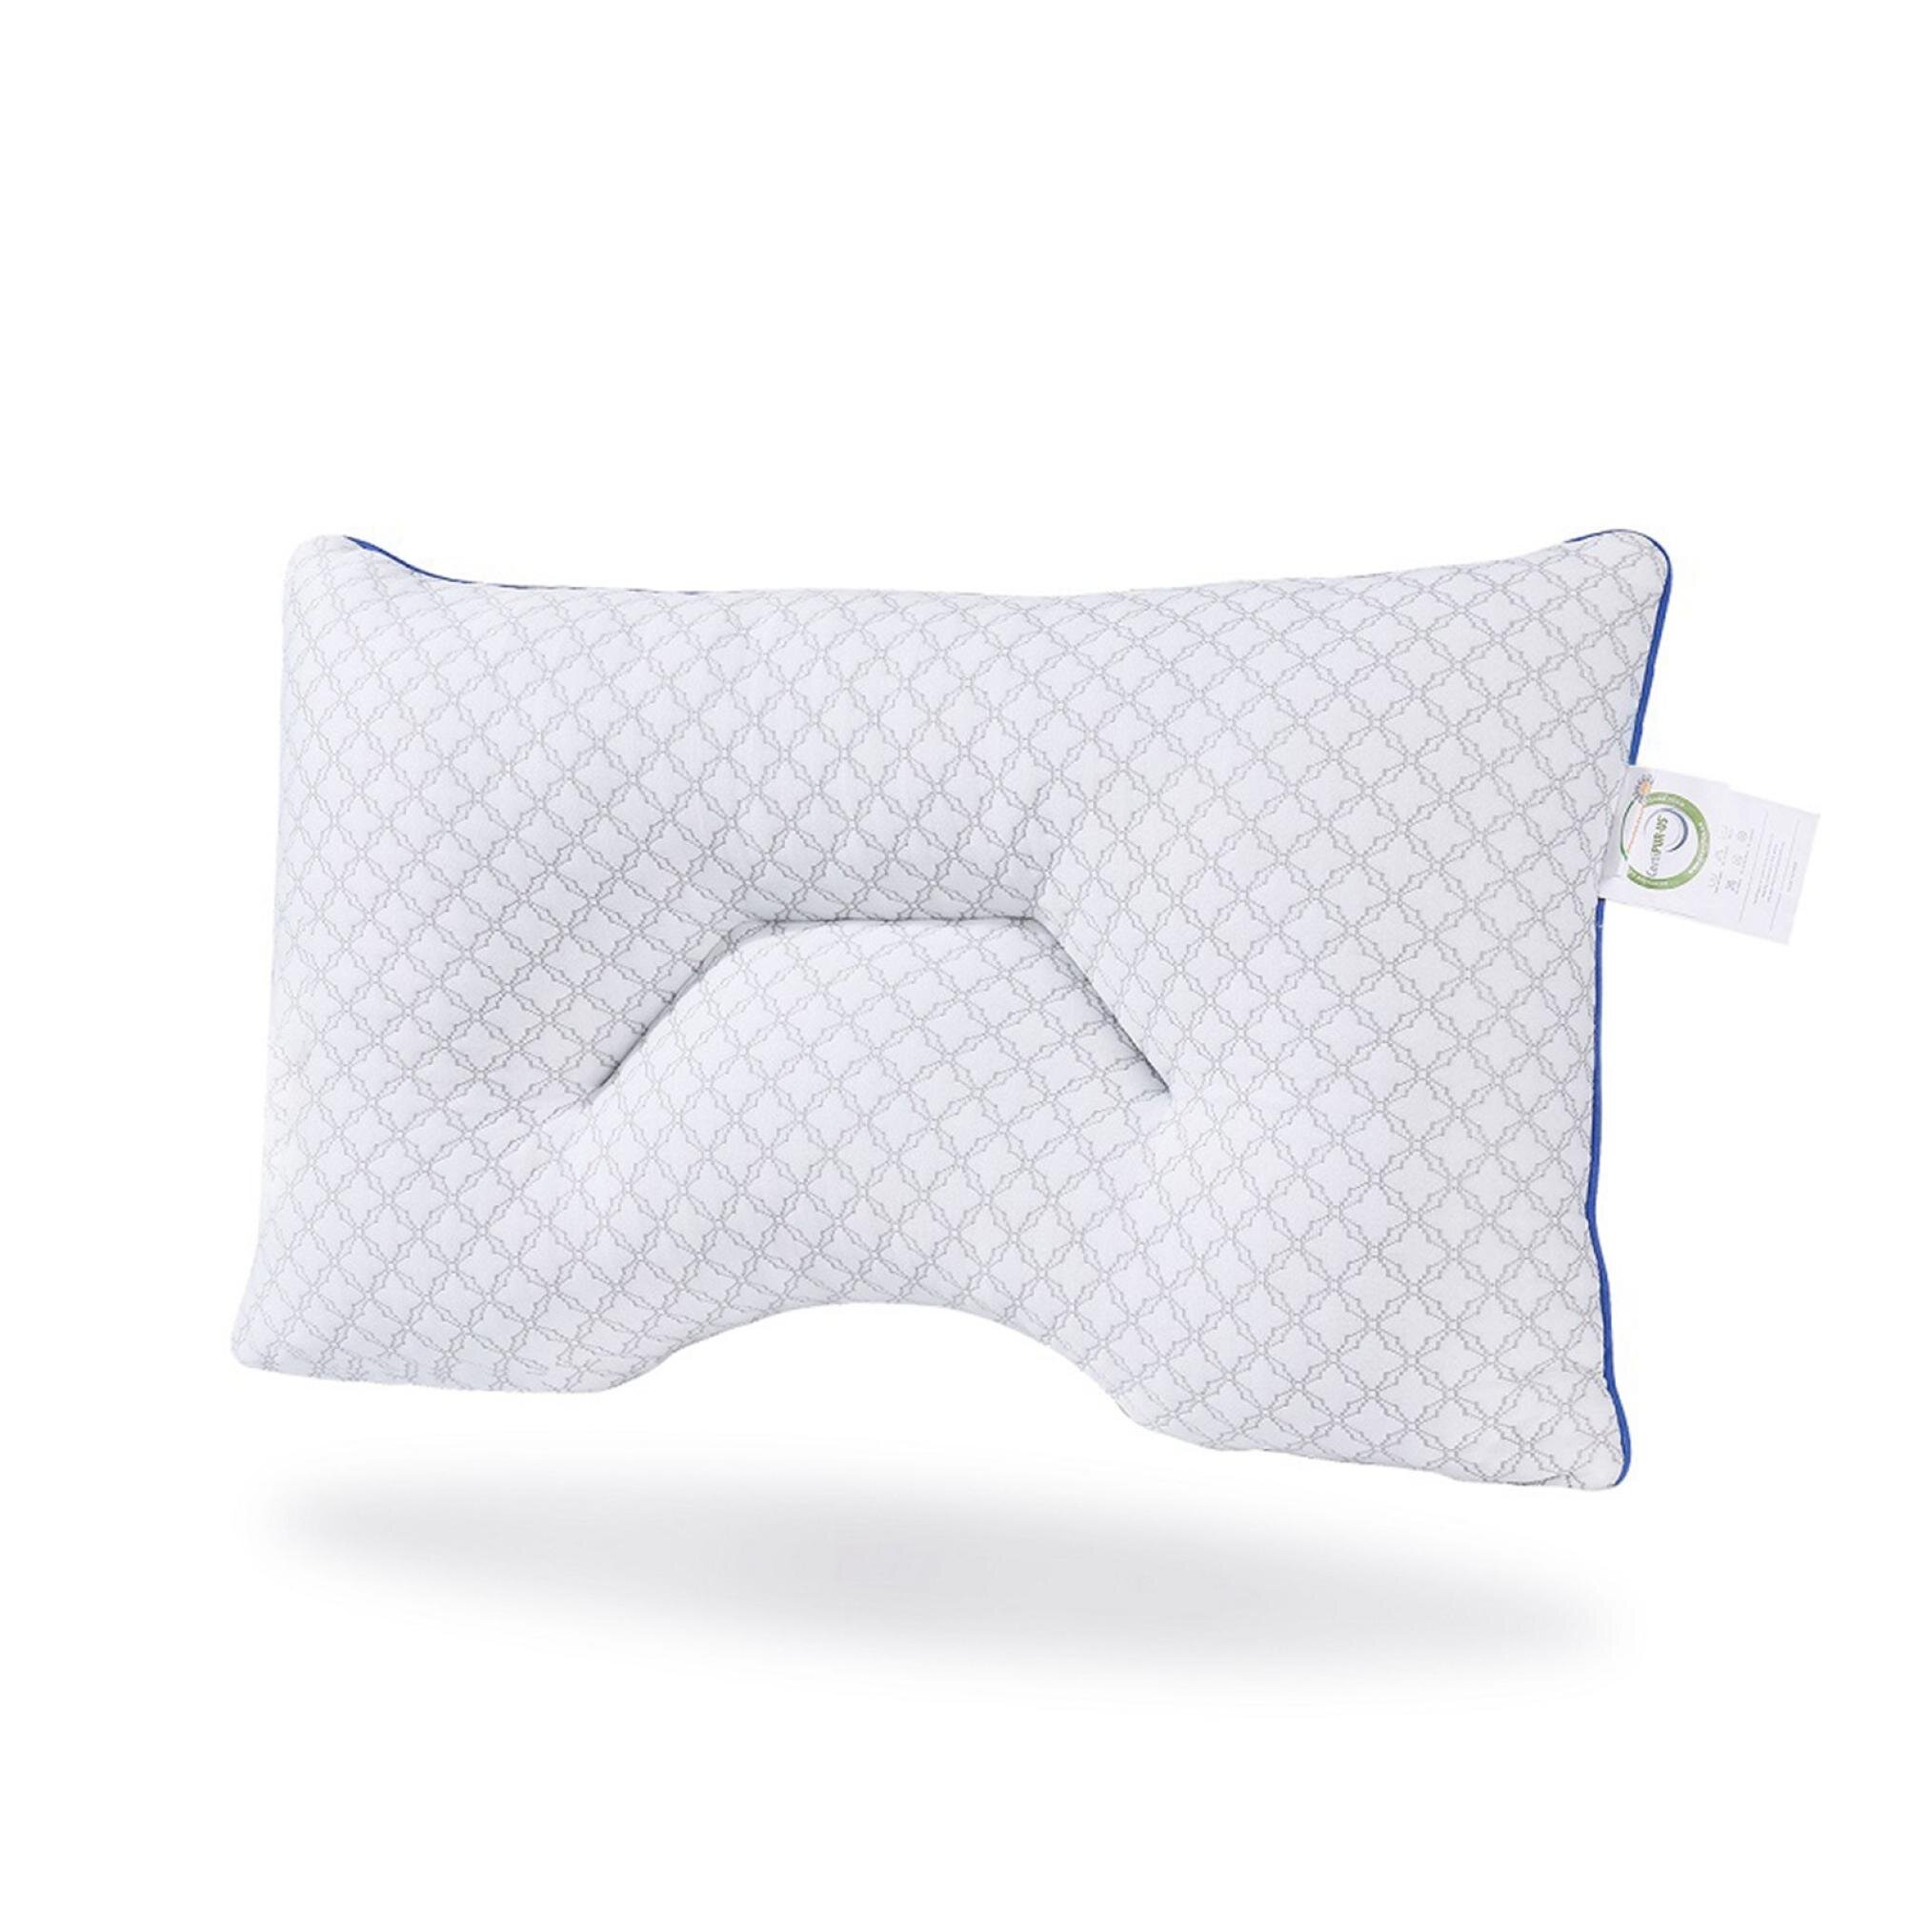 Luxury Shredded Memory Foam Pillow Cool Touch Orthopaedic Neck Support Pillows